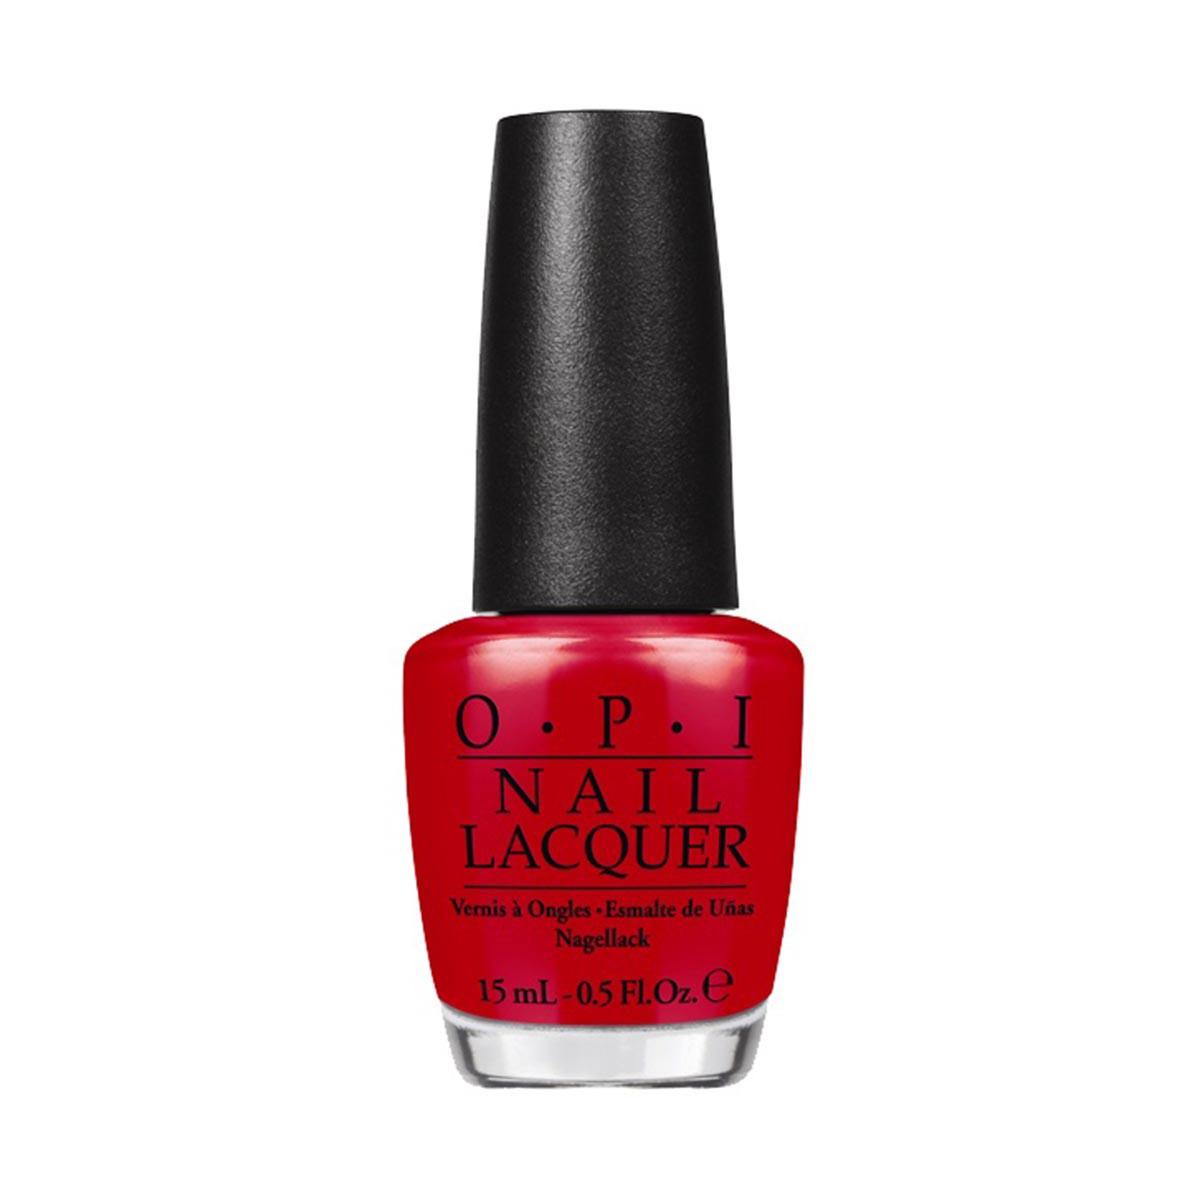 opi-nail-lacquer-nll72-red